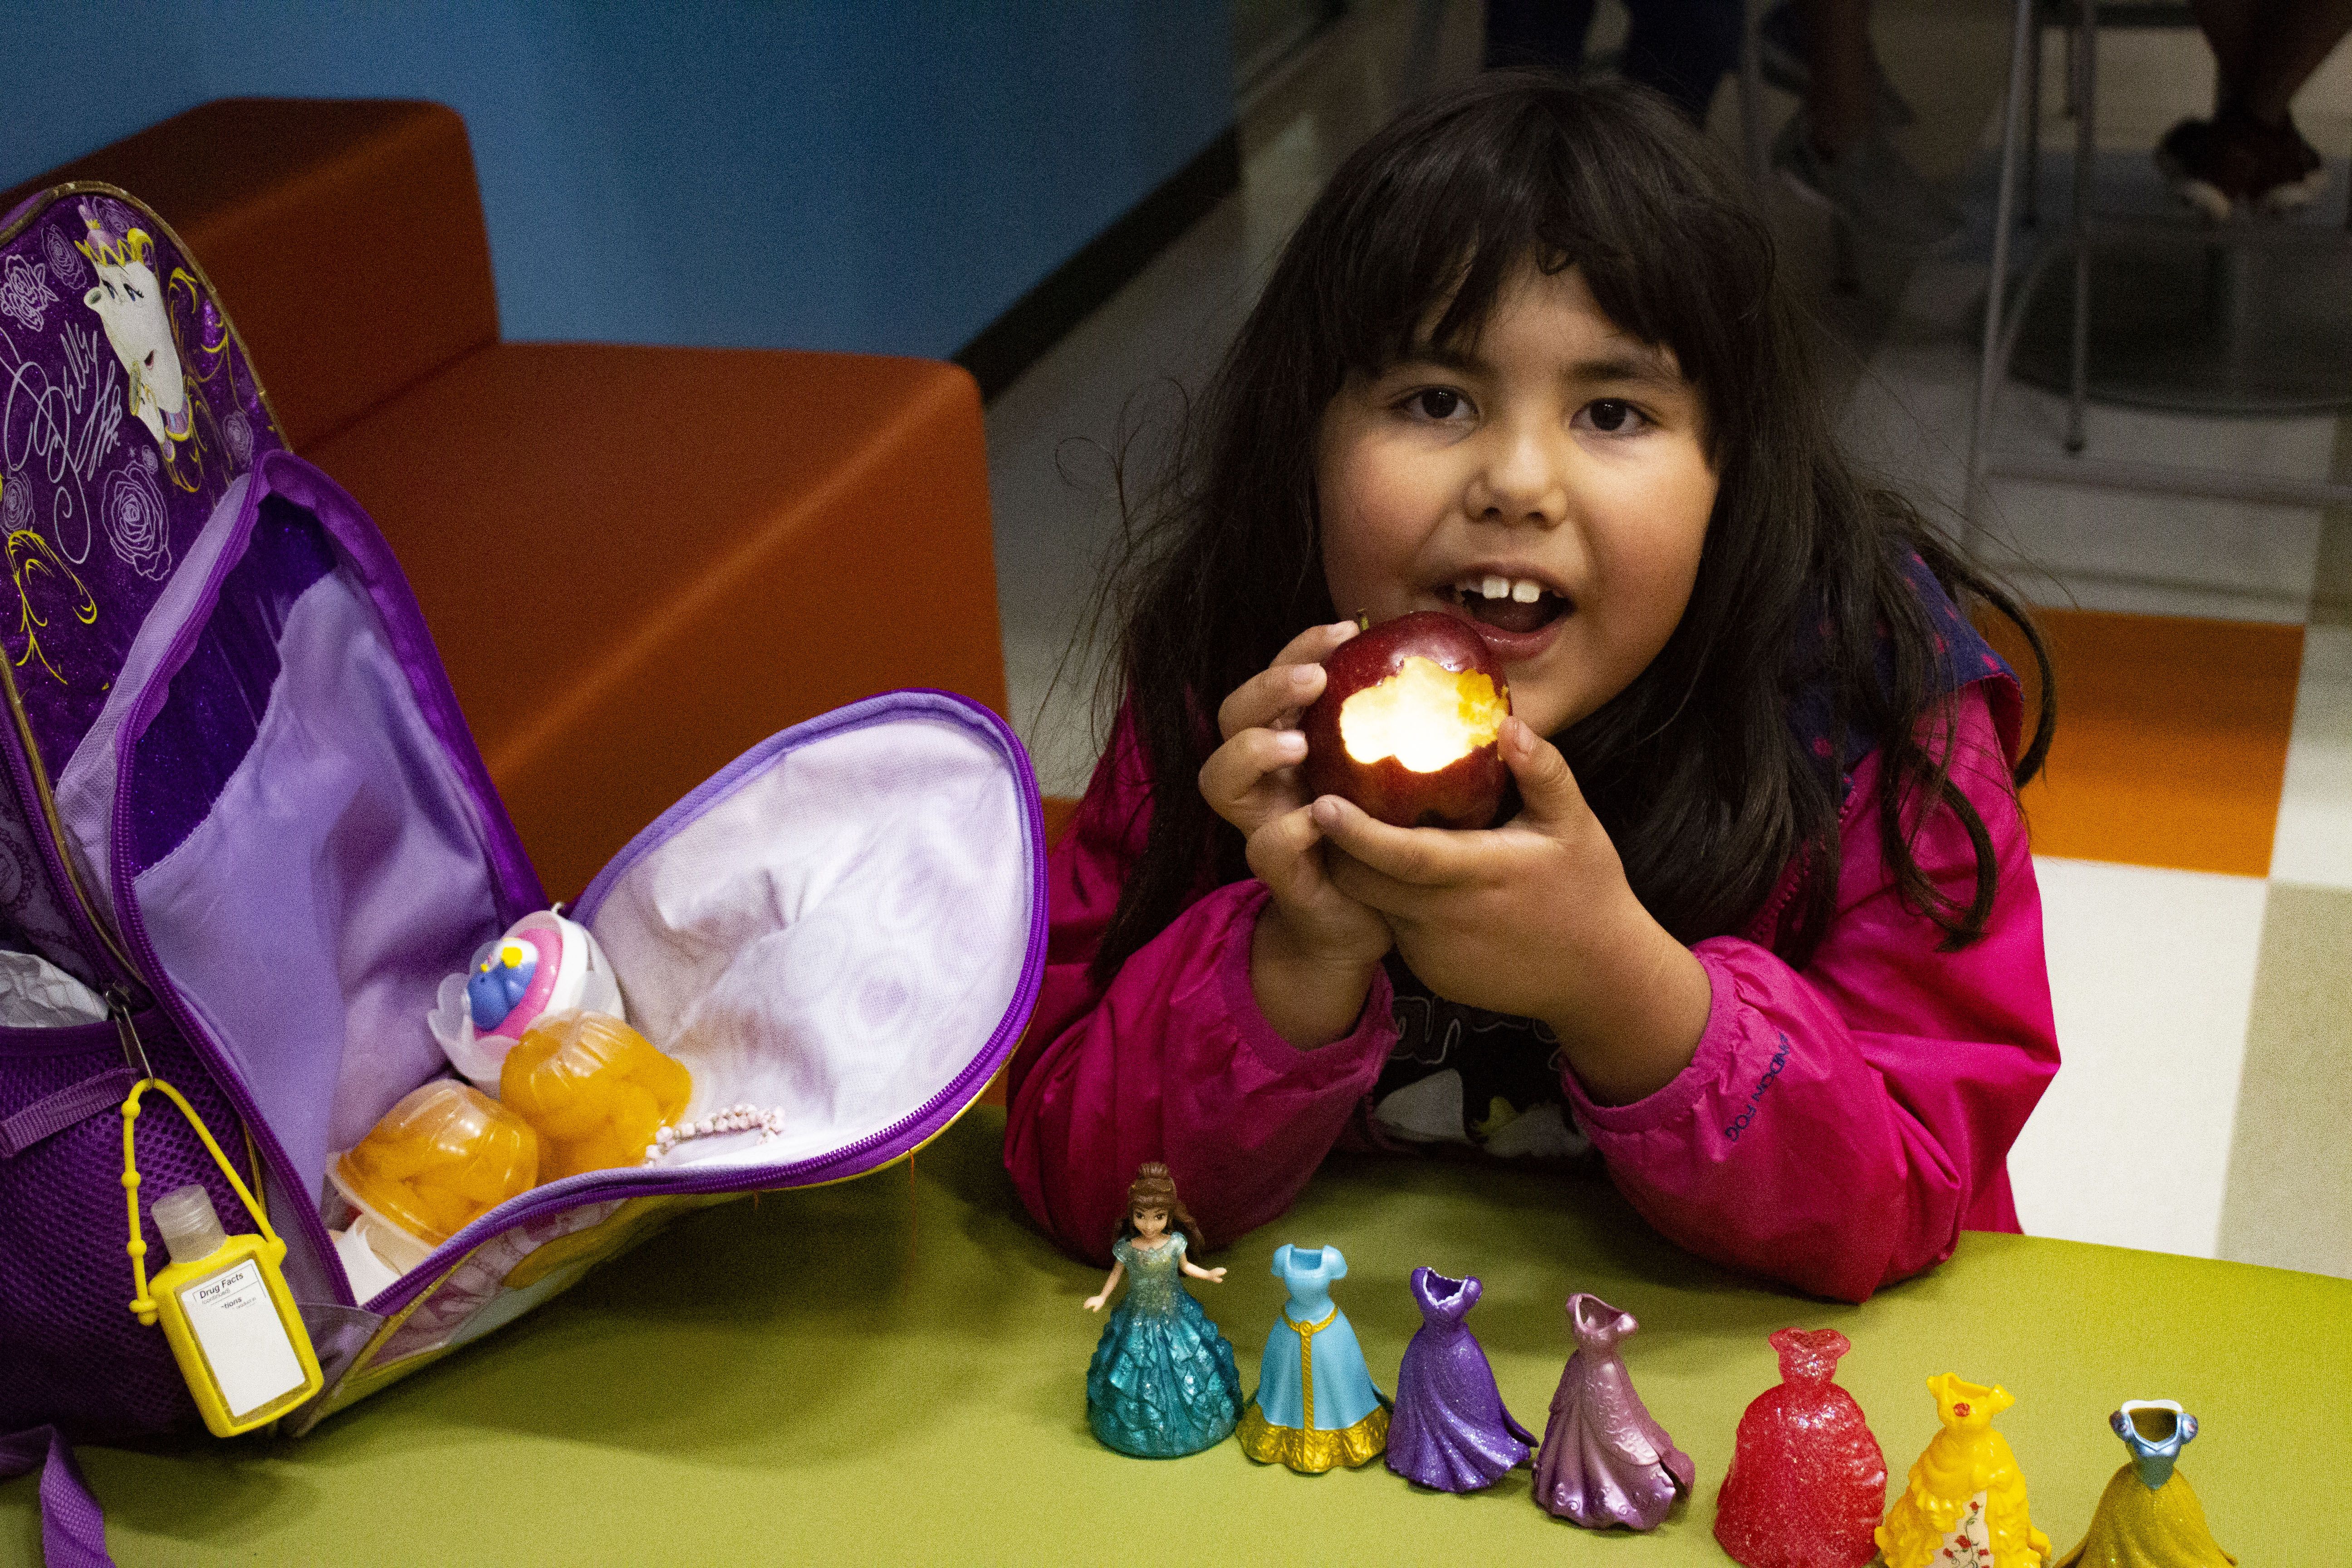 Isabella Paquin, 6, from Santa Ana Pueblo attends the Wellness Center where she likes to have carrots, apple pie and broccoli for snack. She also enjoys swimming and playing in the gym. Image by Viridiana Vidales Coyt. United States, 2017.